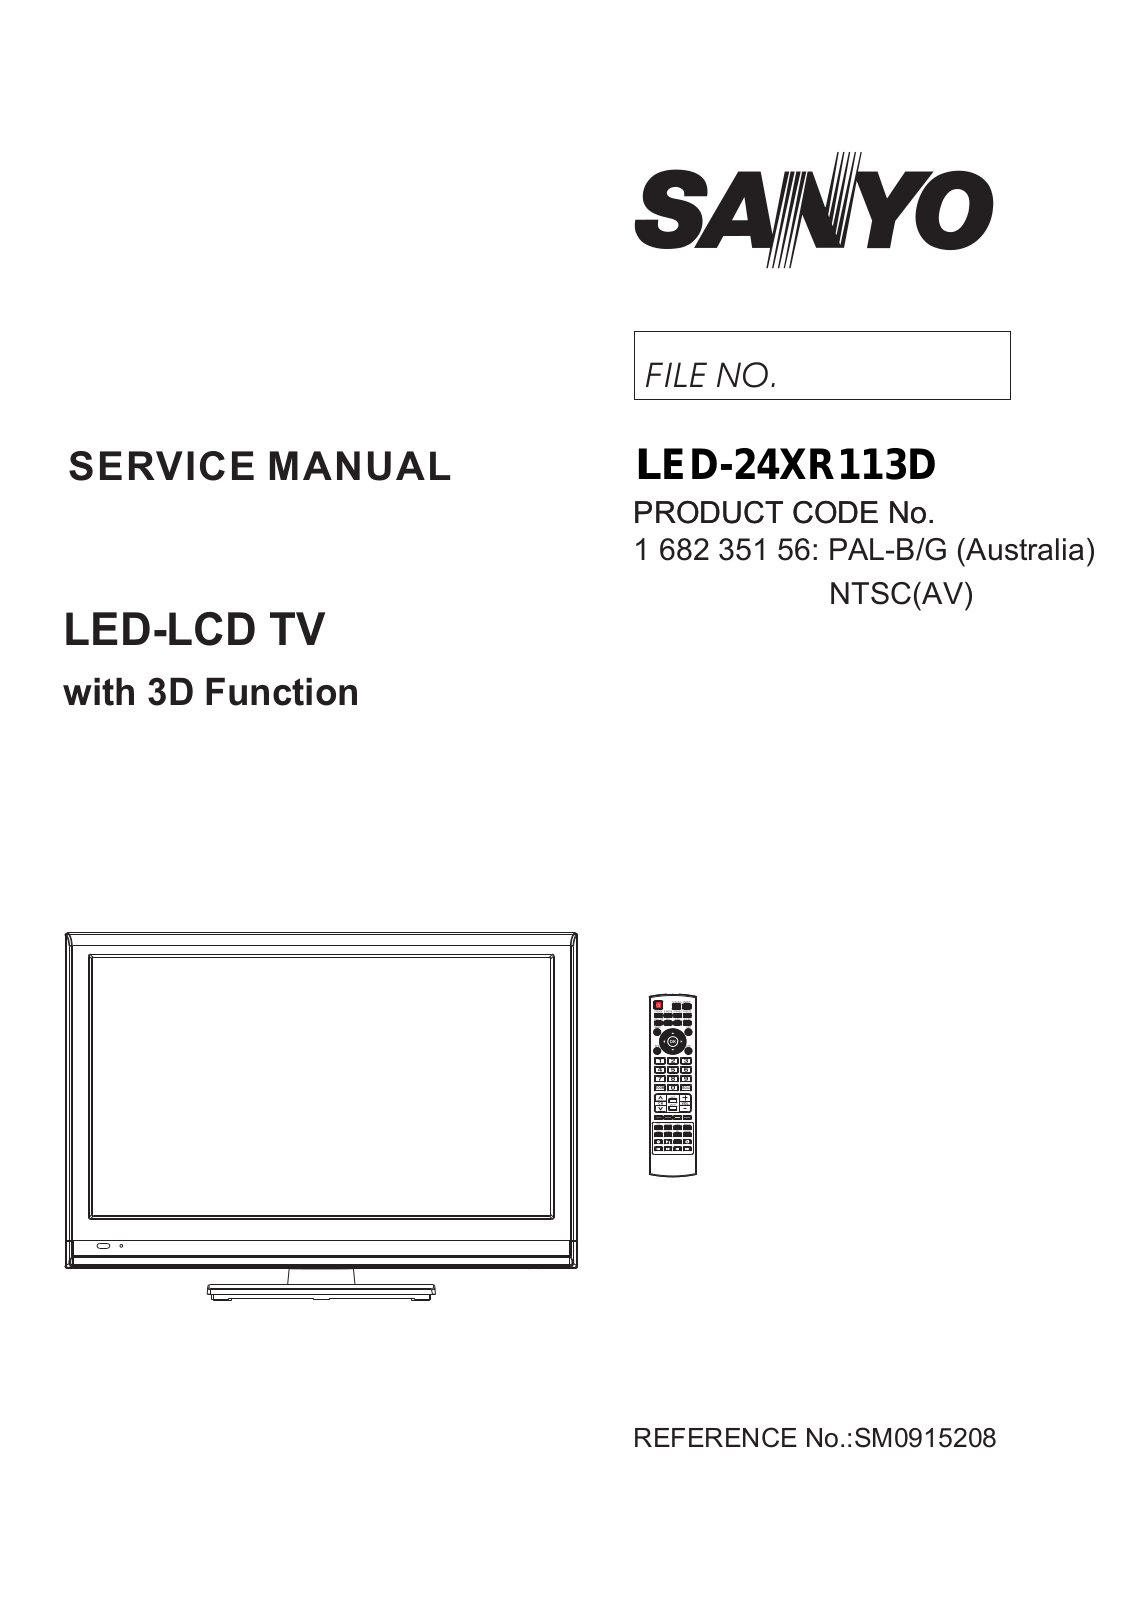 Sanyo 24XR113D, LED-24XR113D Schematic